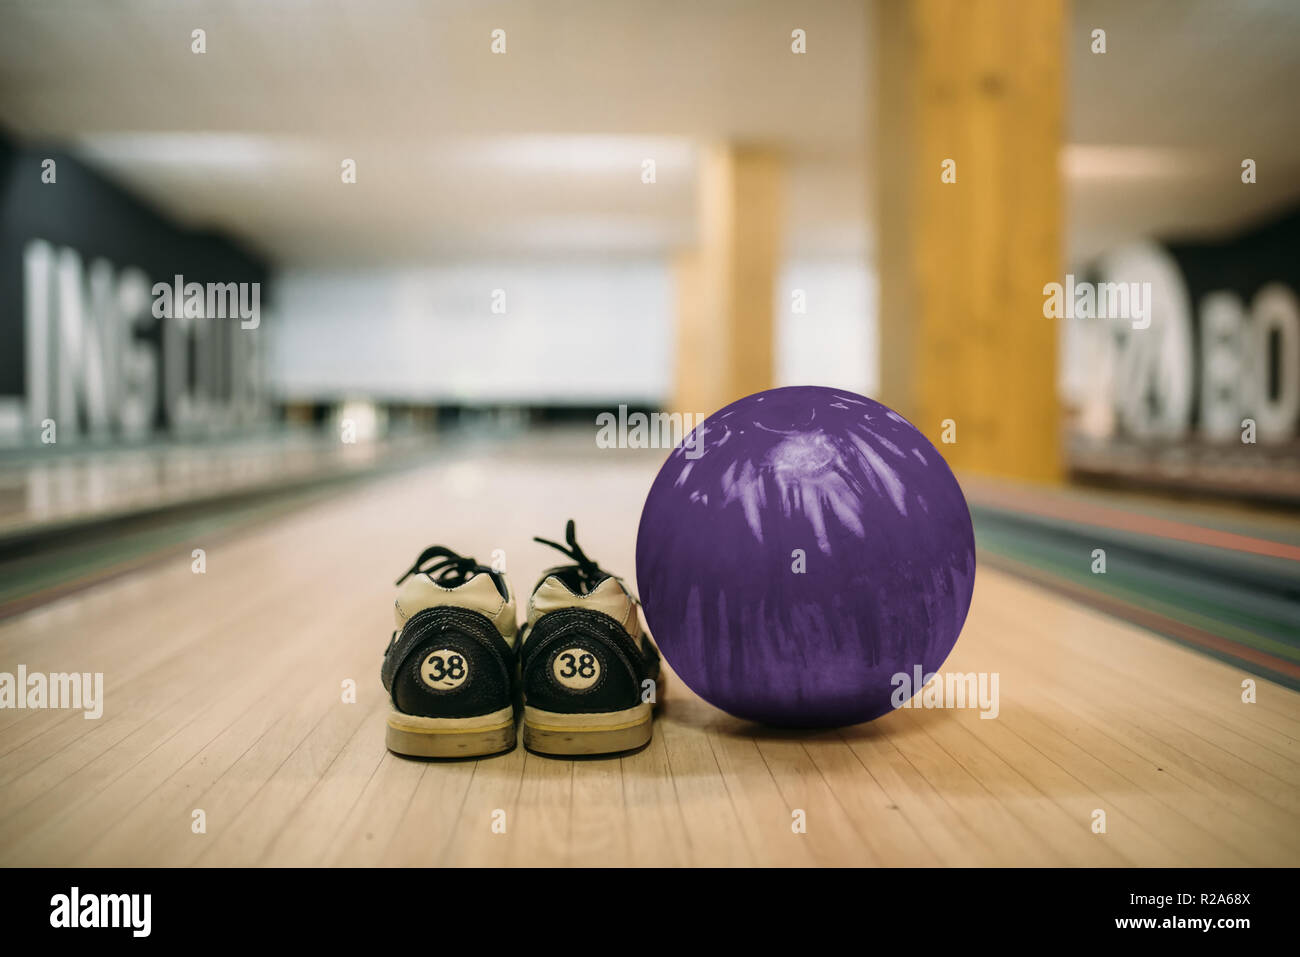 Bowling ball and house shoes on lane in club, closeup view, nobody. Bowl game concept, active hobby Stock Photo